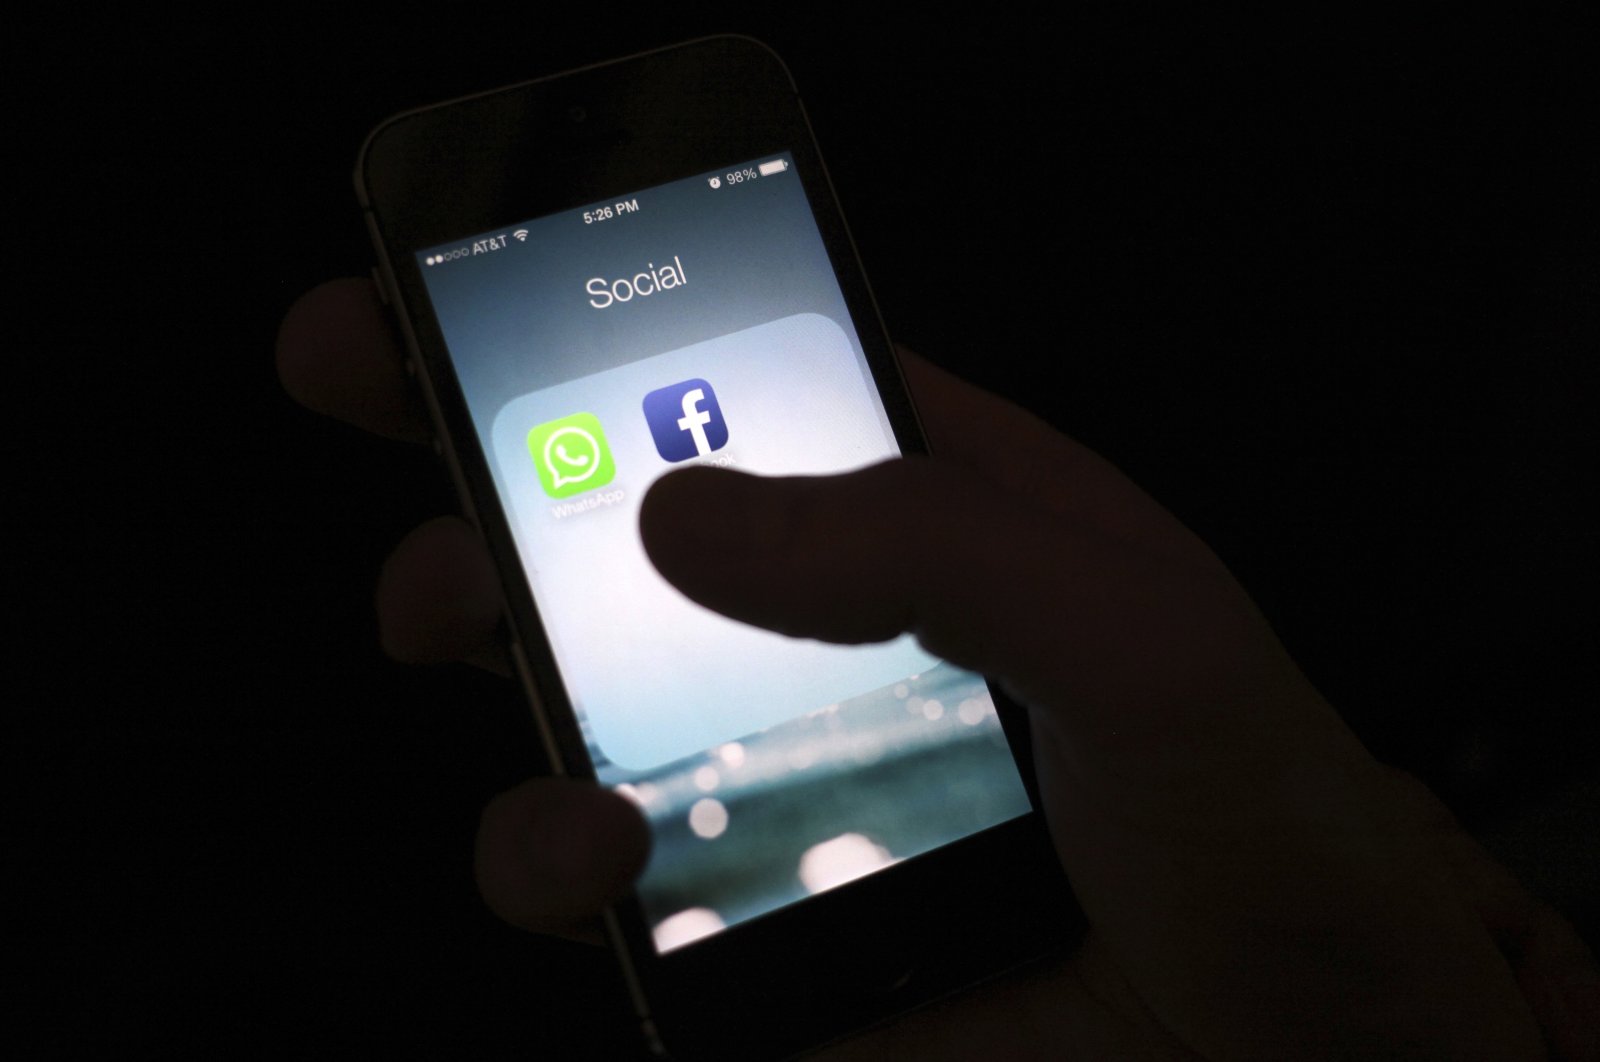  This Feb. 19, 2014, file photo shows the Facebook app icon on an iPhone in New York. (AP File Photo)